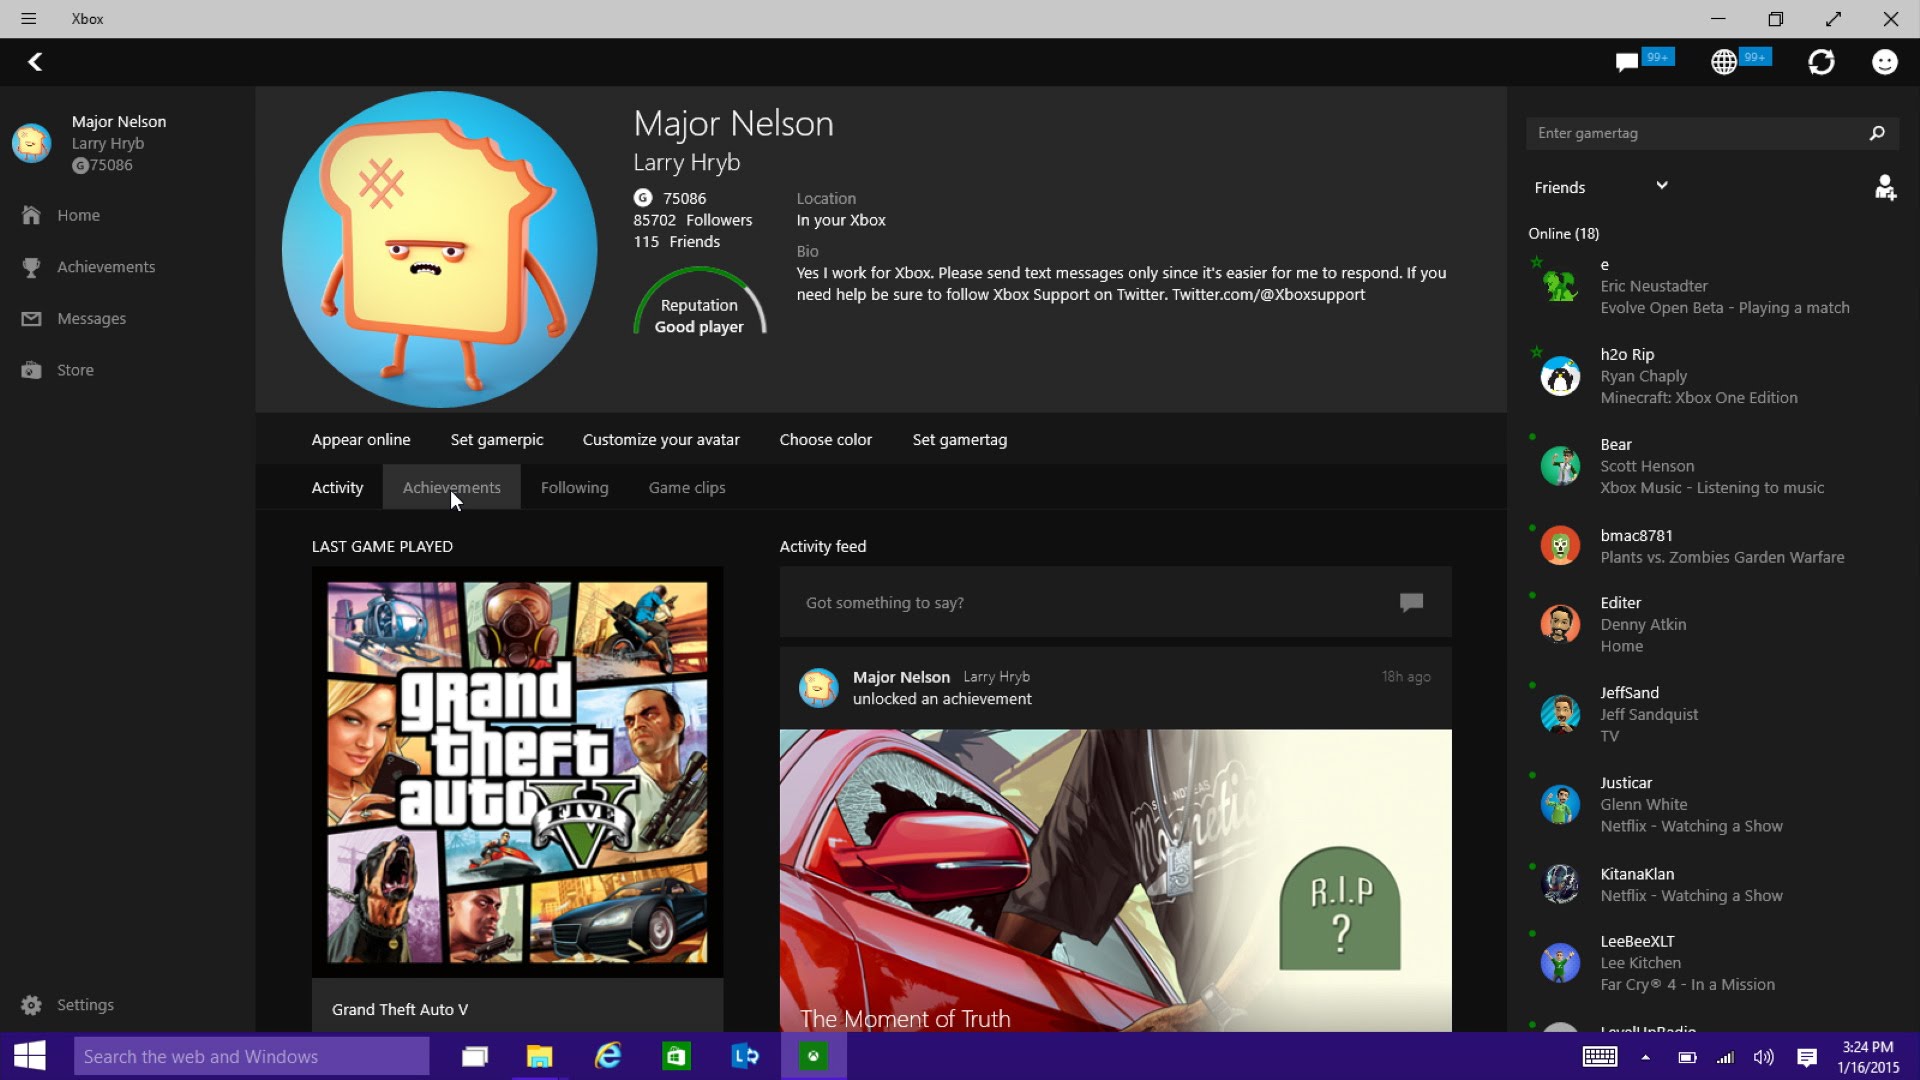 My Experiences section on the Xbox Discover page ignores your